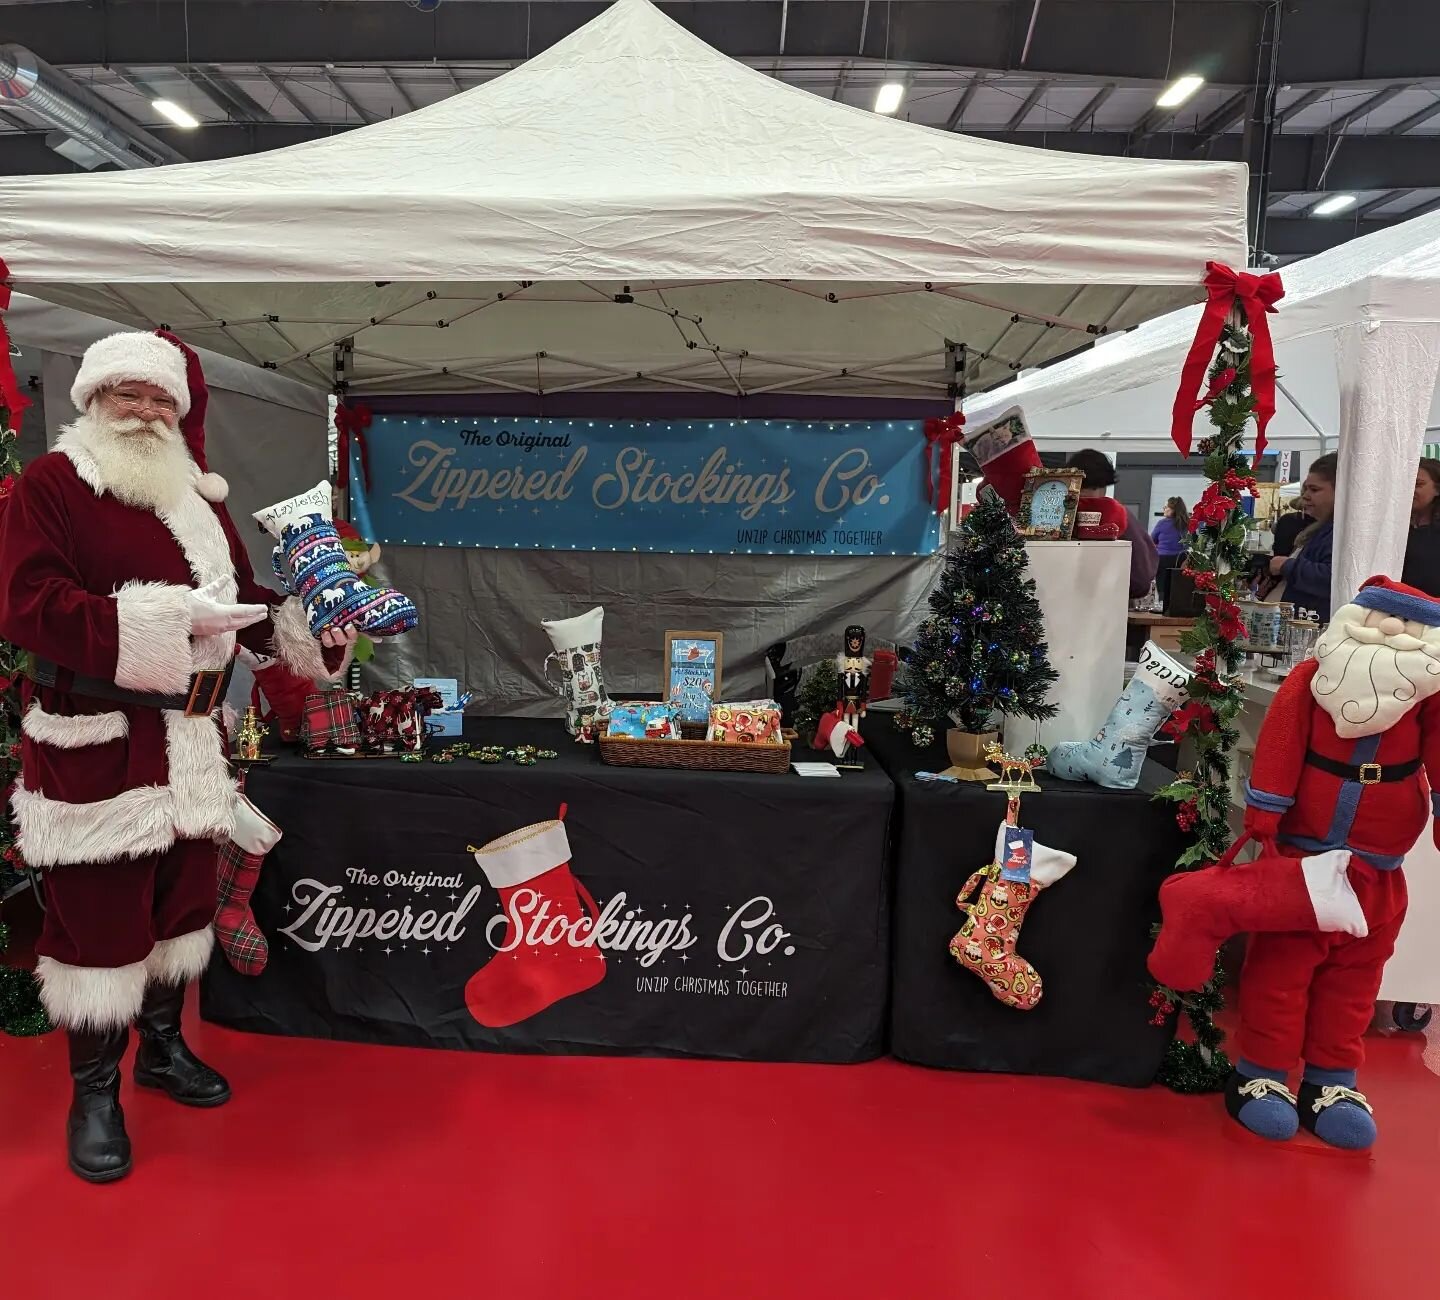 It's official, our stockings are Santa approved! Come get yours today at Legacy Park in Fieldhouse A.
We're open until 4 pm!